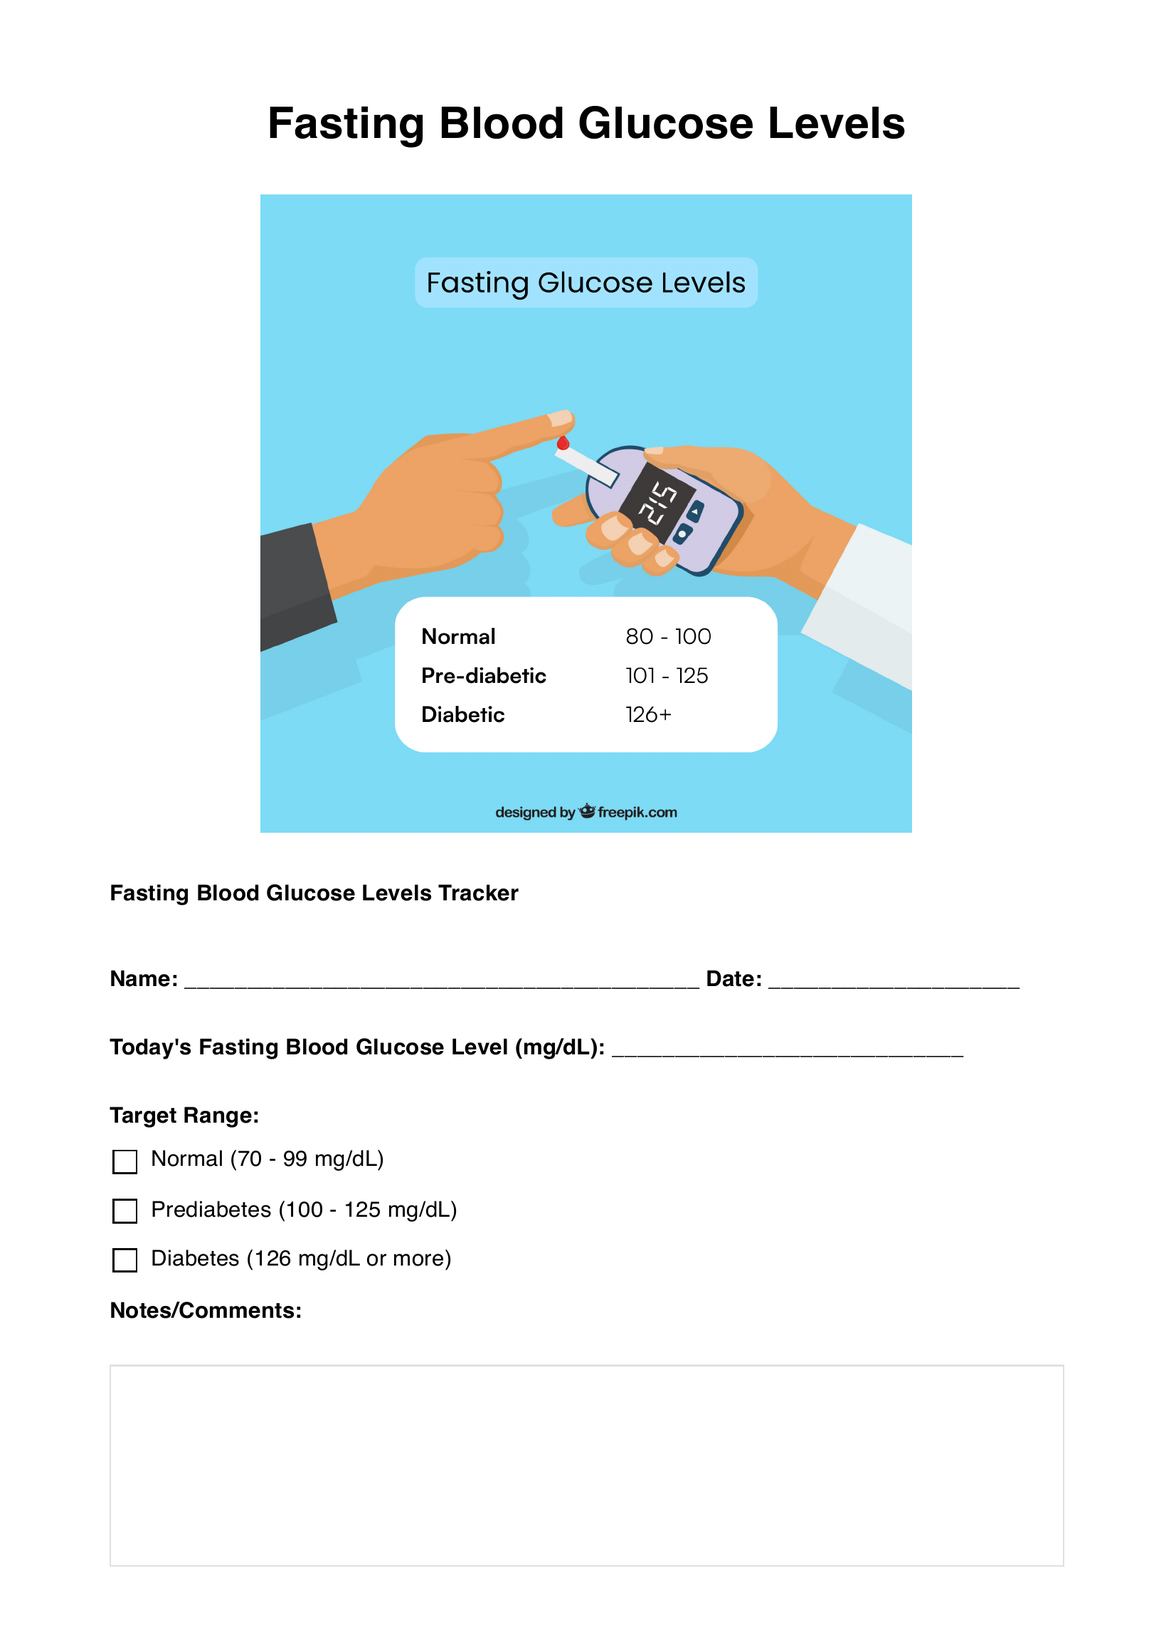 Fasting Blood Glucose Levels PDF Example